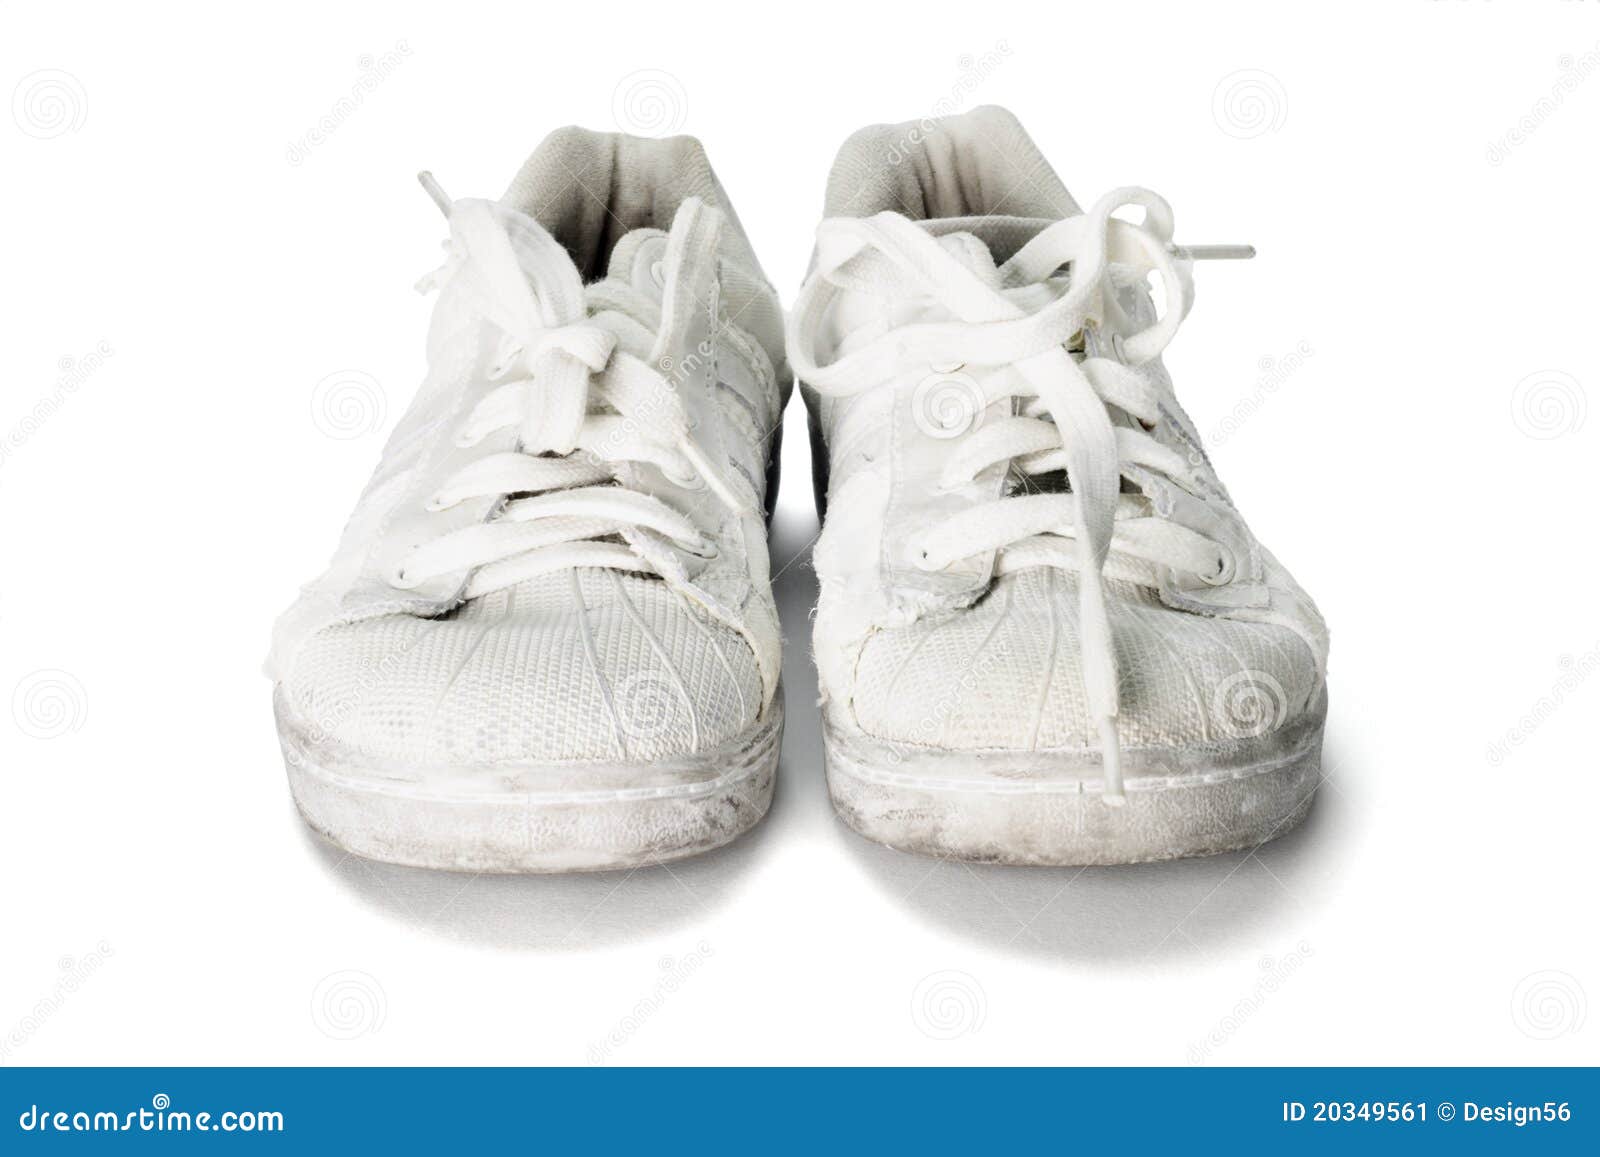 Old canvas shoes stock image. Image of dirty, pair, jogging - 20349561